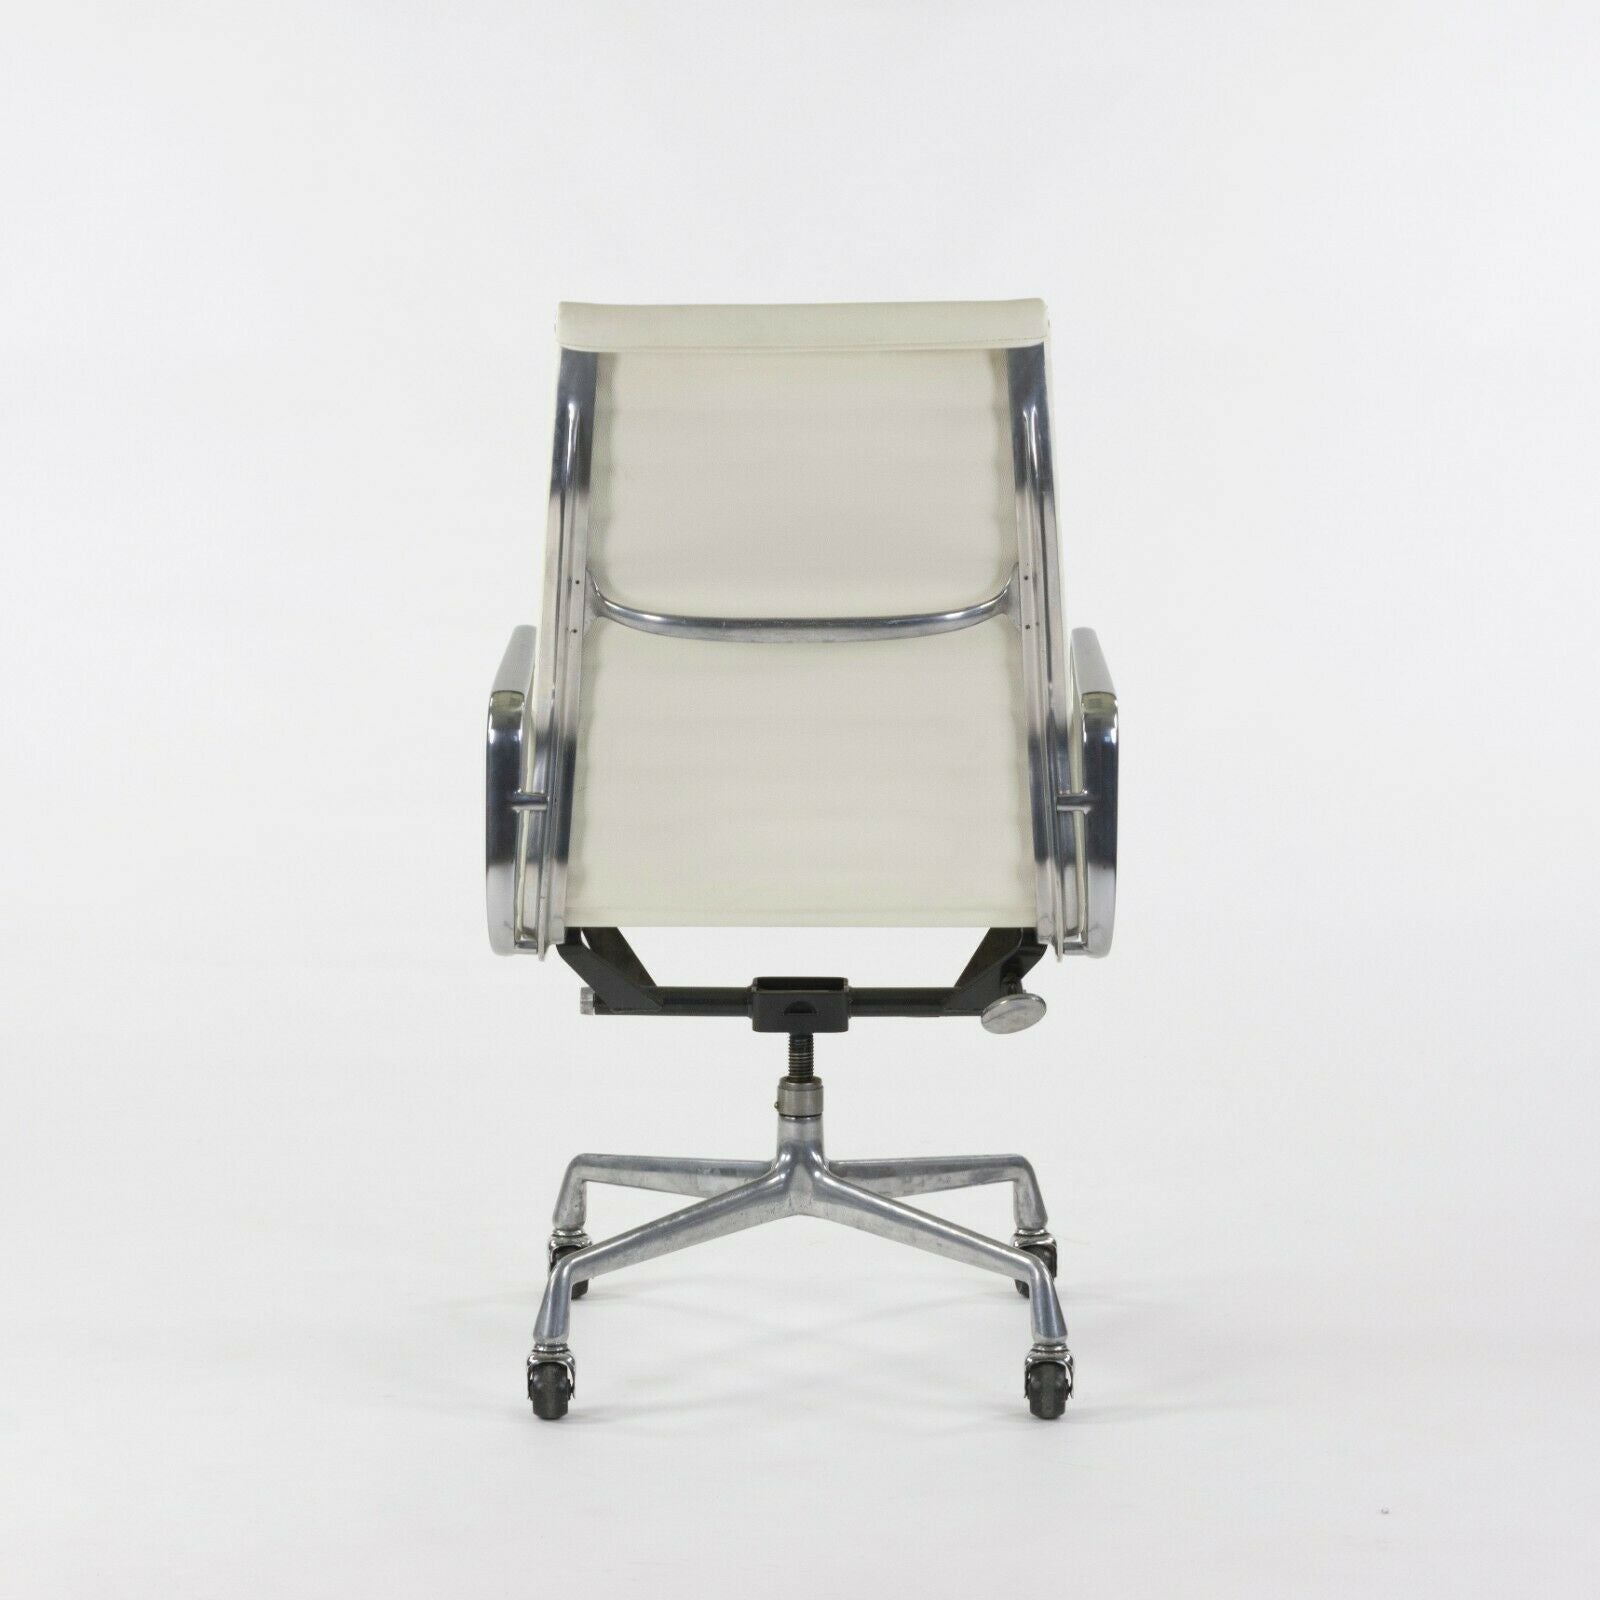 SOLD Herman Miller Eames Aluminum Group Executive High Back Desk Chair White Leather